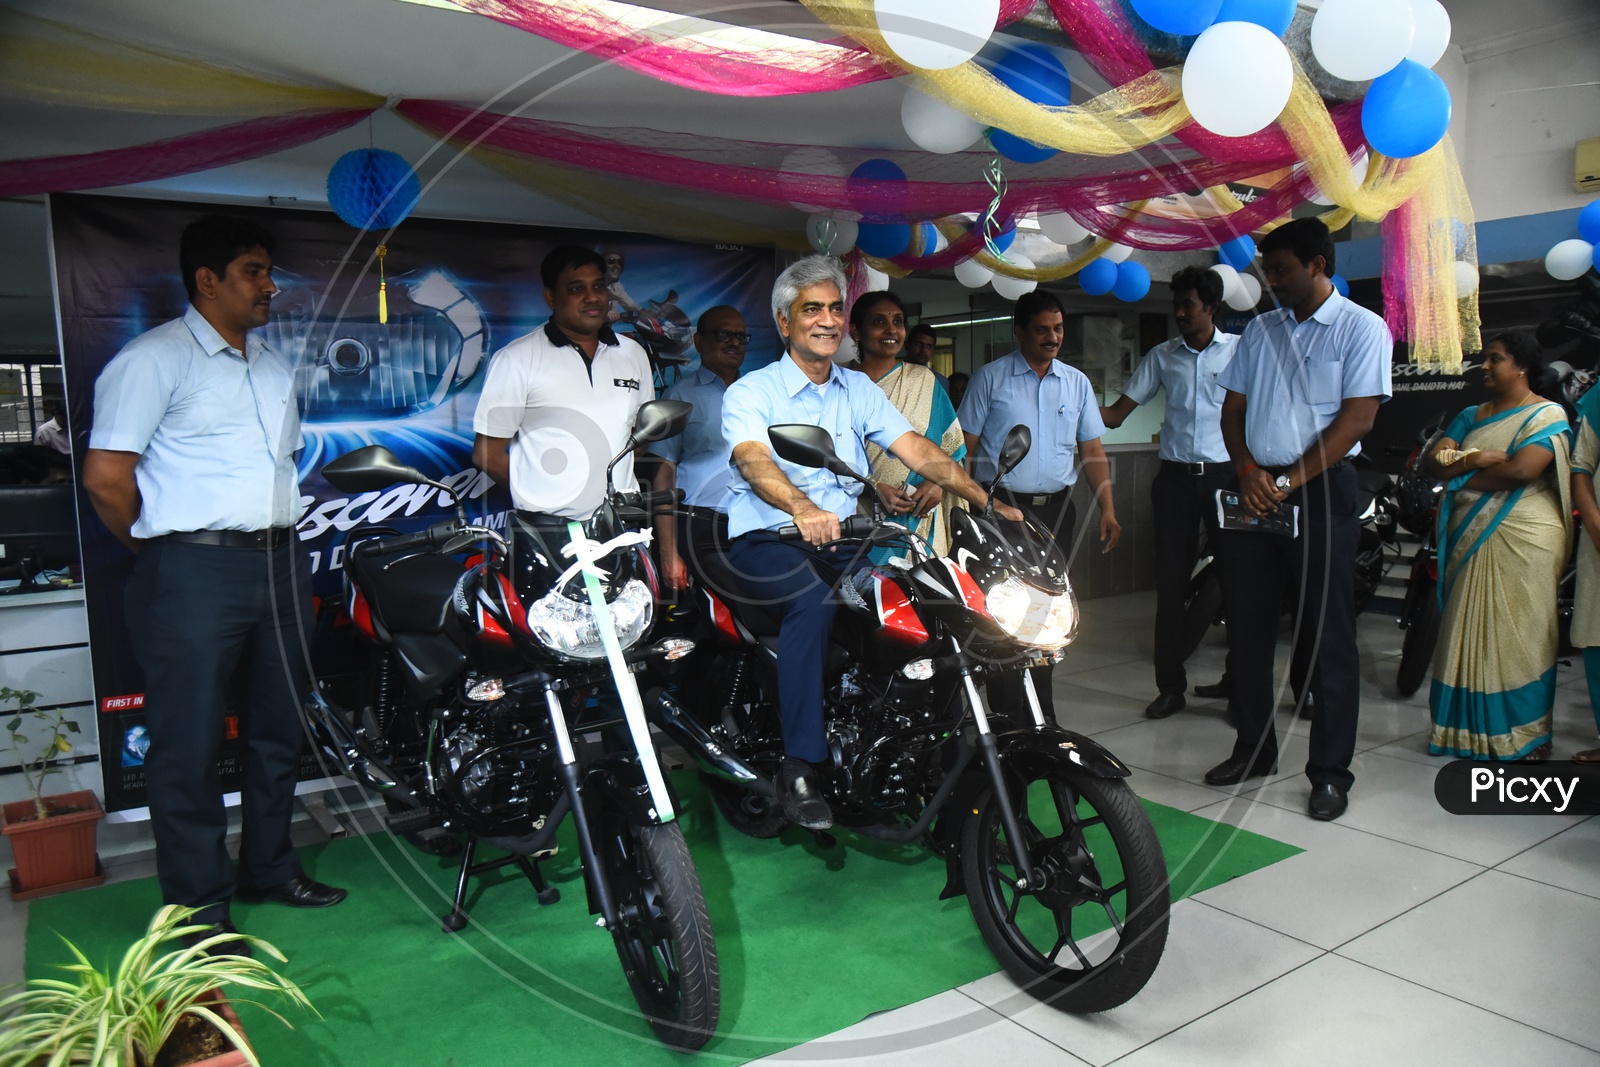 Staff checking the new Bajaj Discover motorcycle